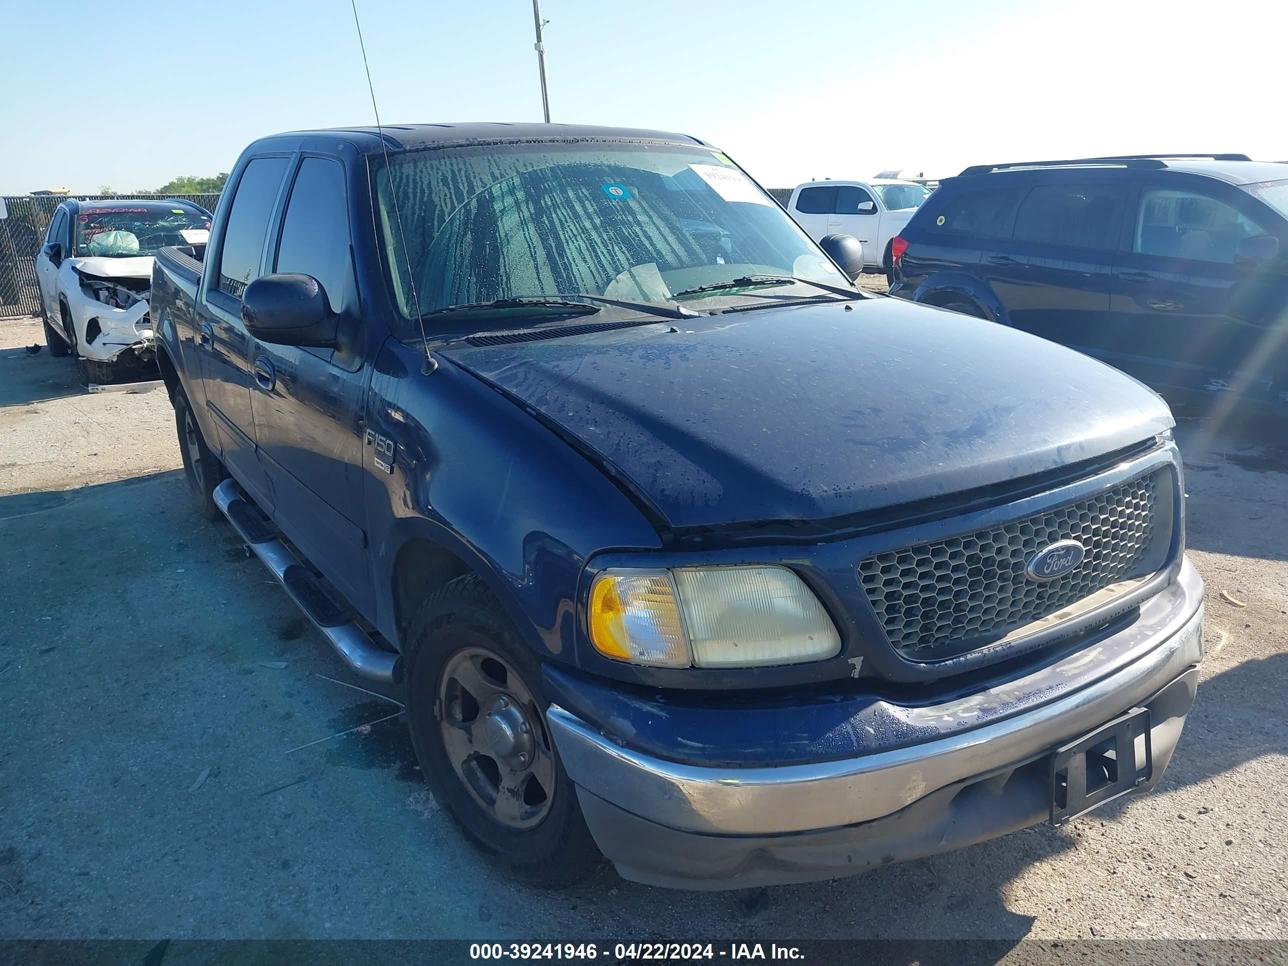 vin: 1FTRW07693KD88435 1FTRW07693KD88435 2003 ford f-150 4600 for Sale in 76247, 3748 Mcpherson Dr, Justin, Texas, USA